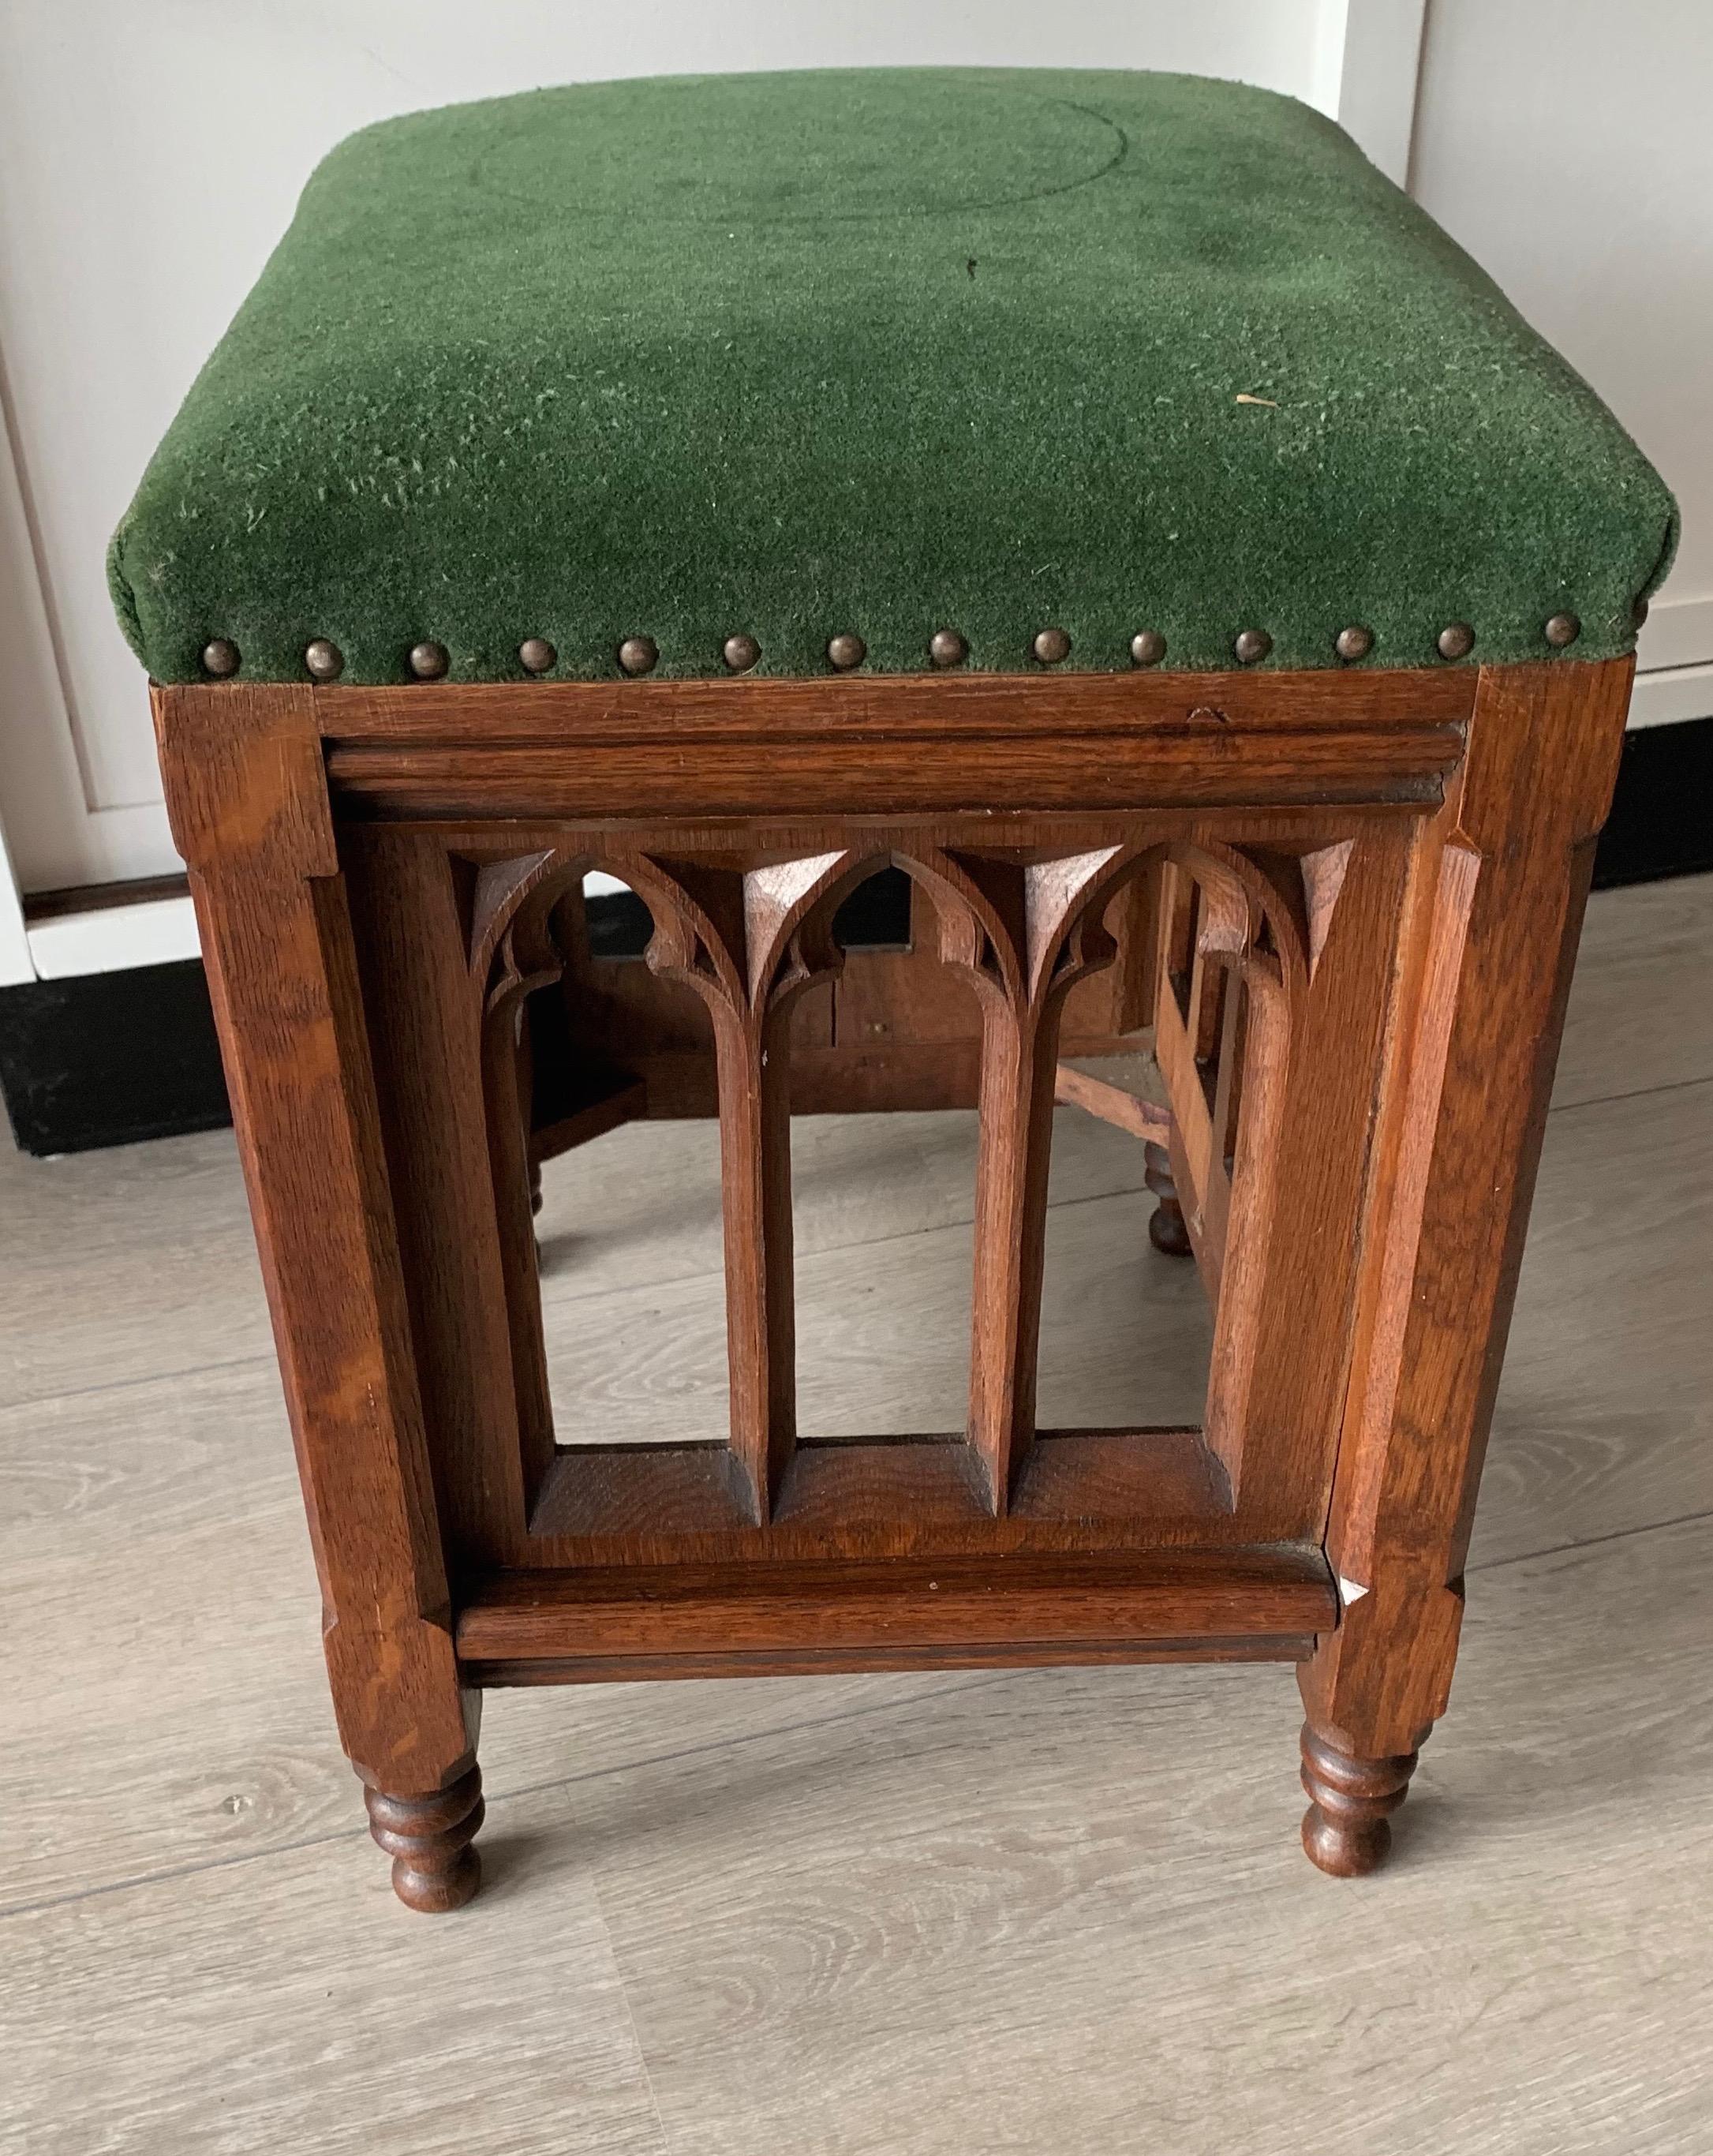 20th Century Unique and Quality Carved Gothic Revival Oak Church Stool Seat w. Velvet Seating